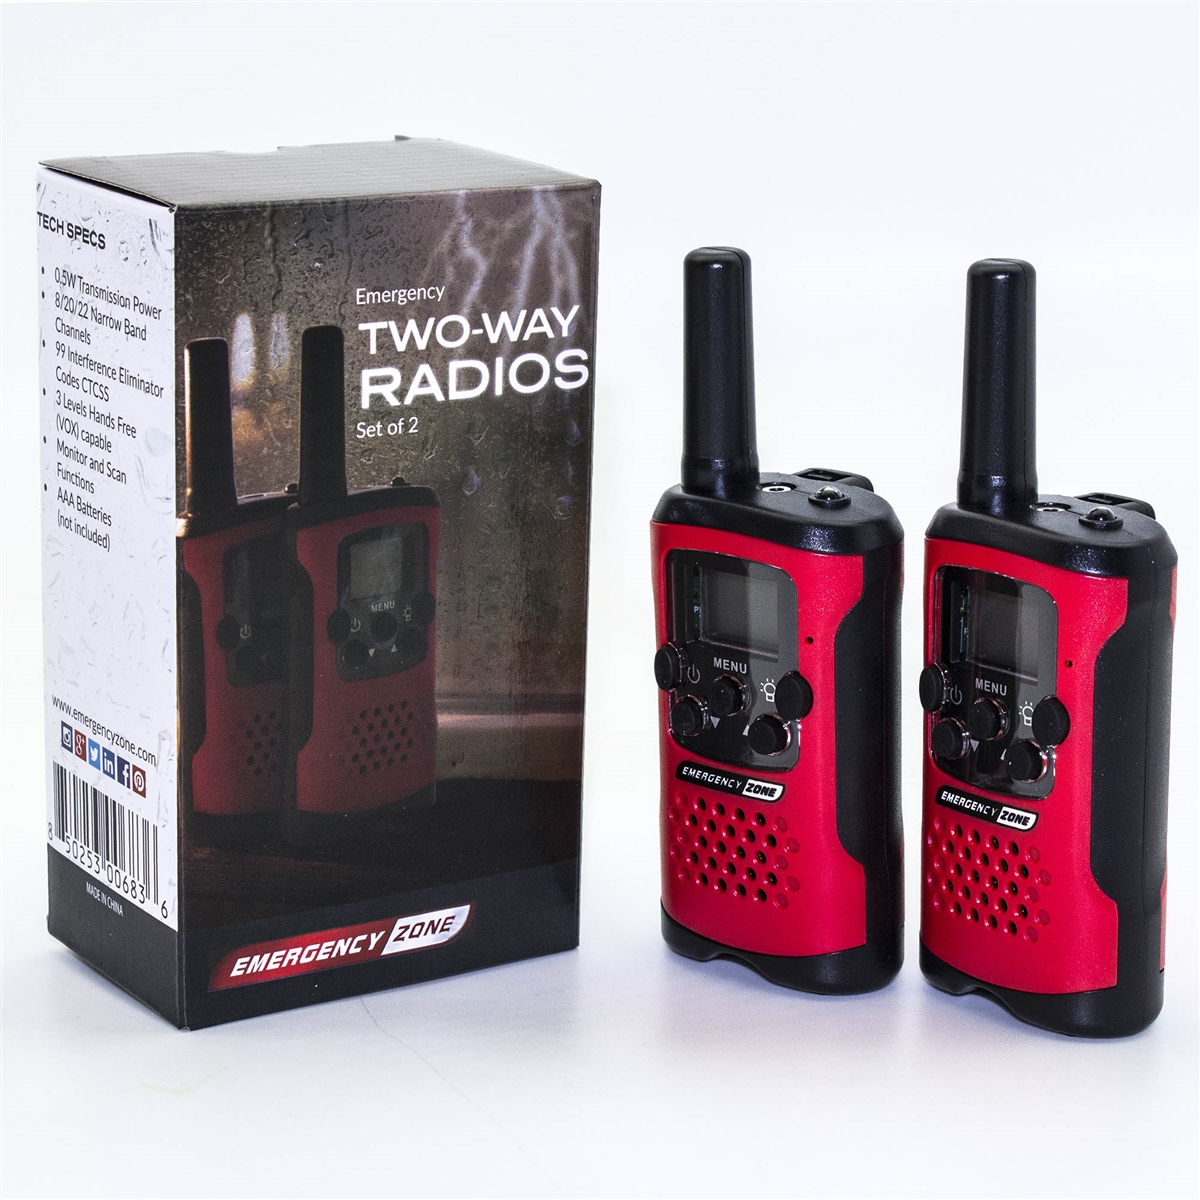 Picture of Emergency Zone 509 Emergency Two-Way Radios